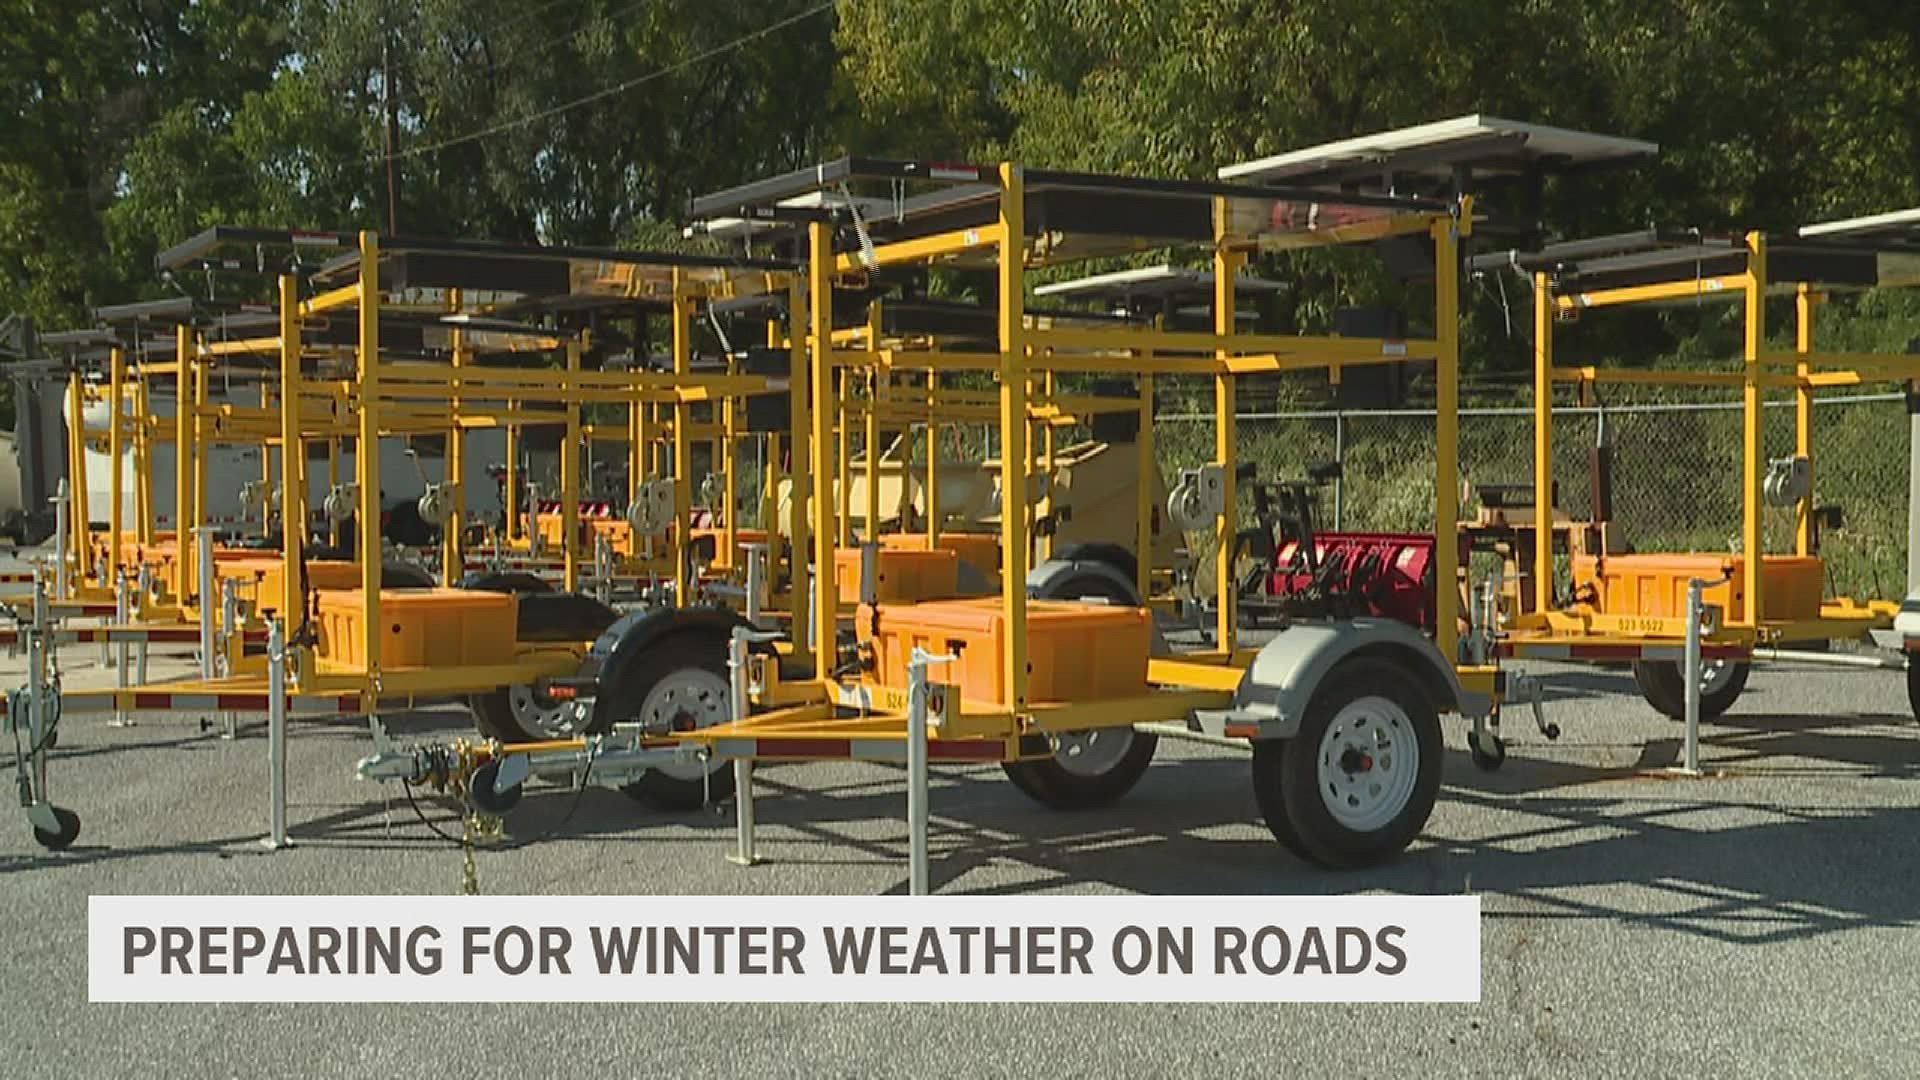 Officials also say there are some simple steps you can take to be as safe as possible on winter roads.